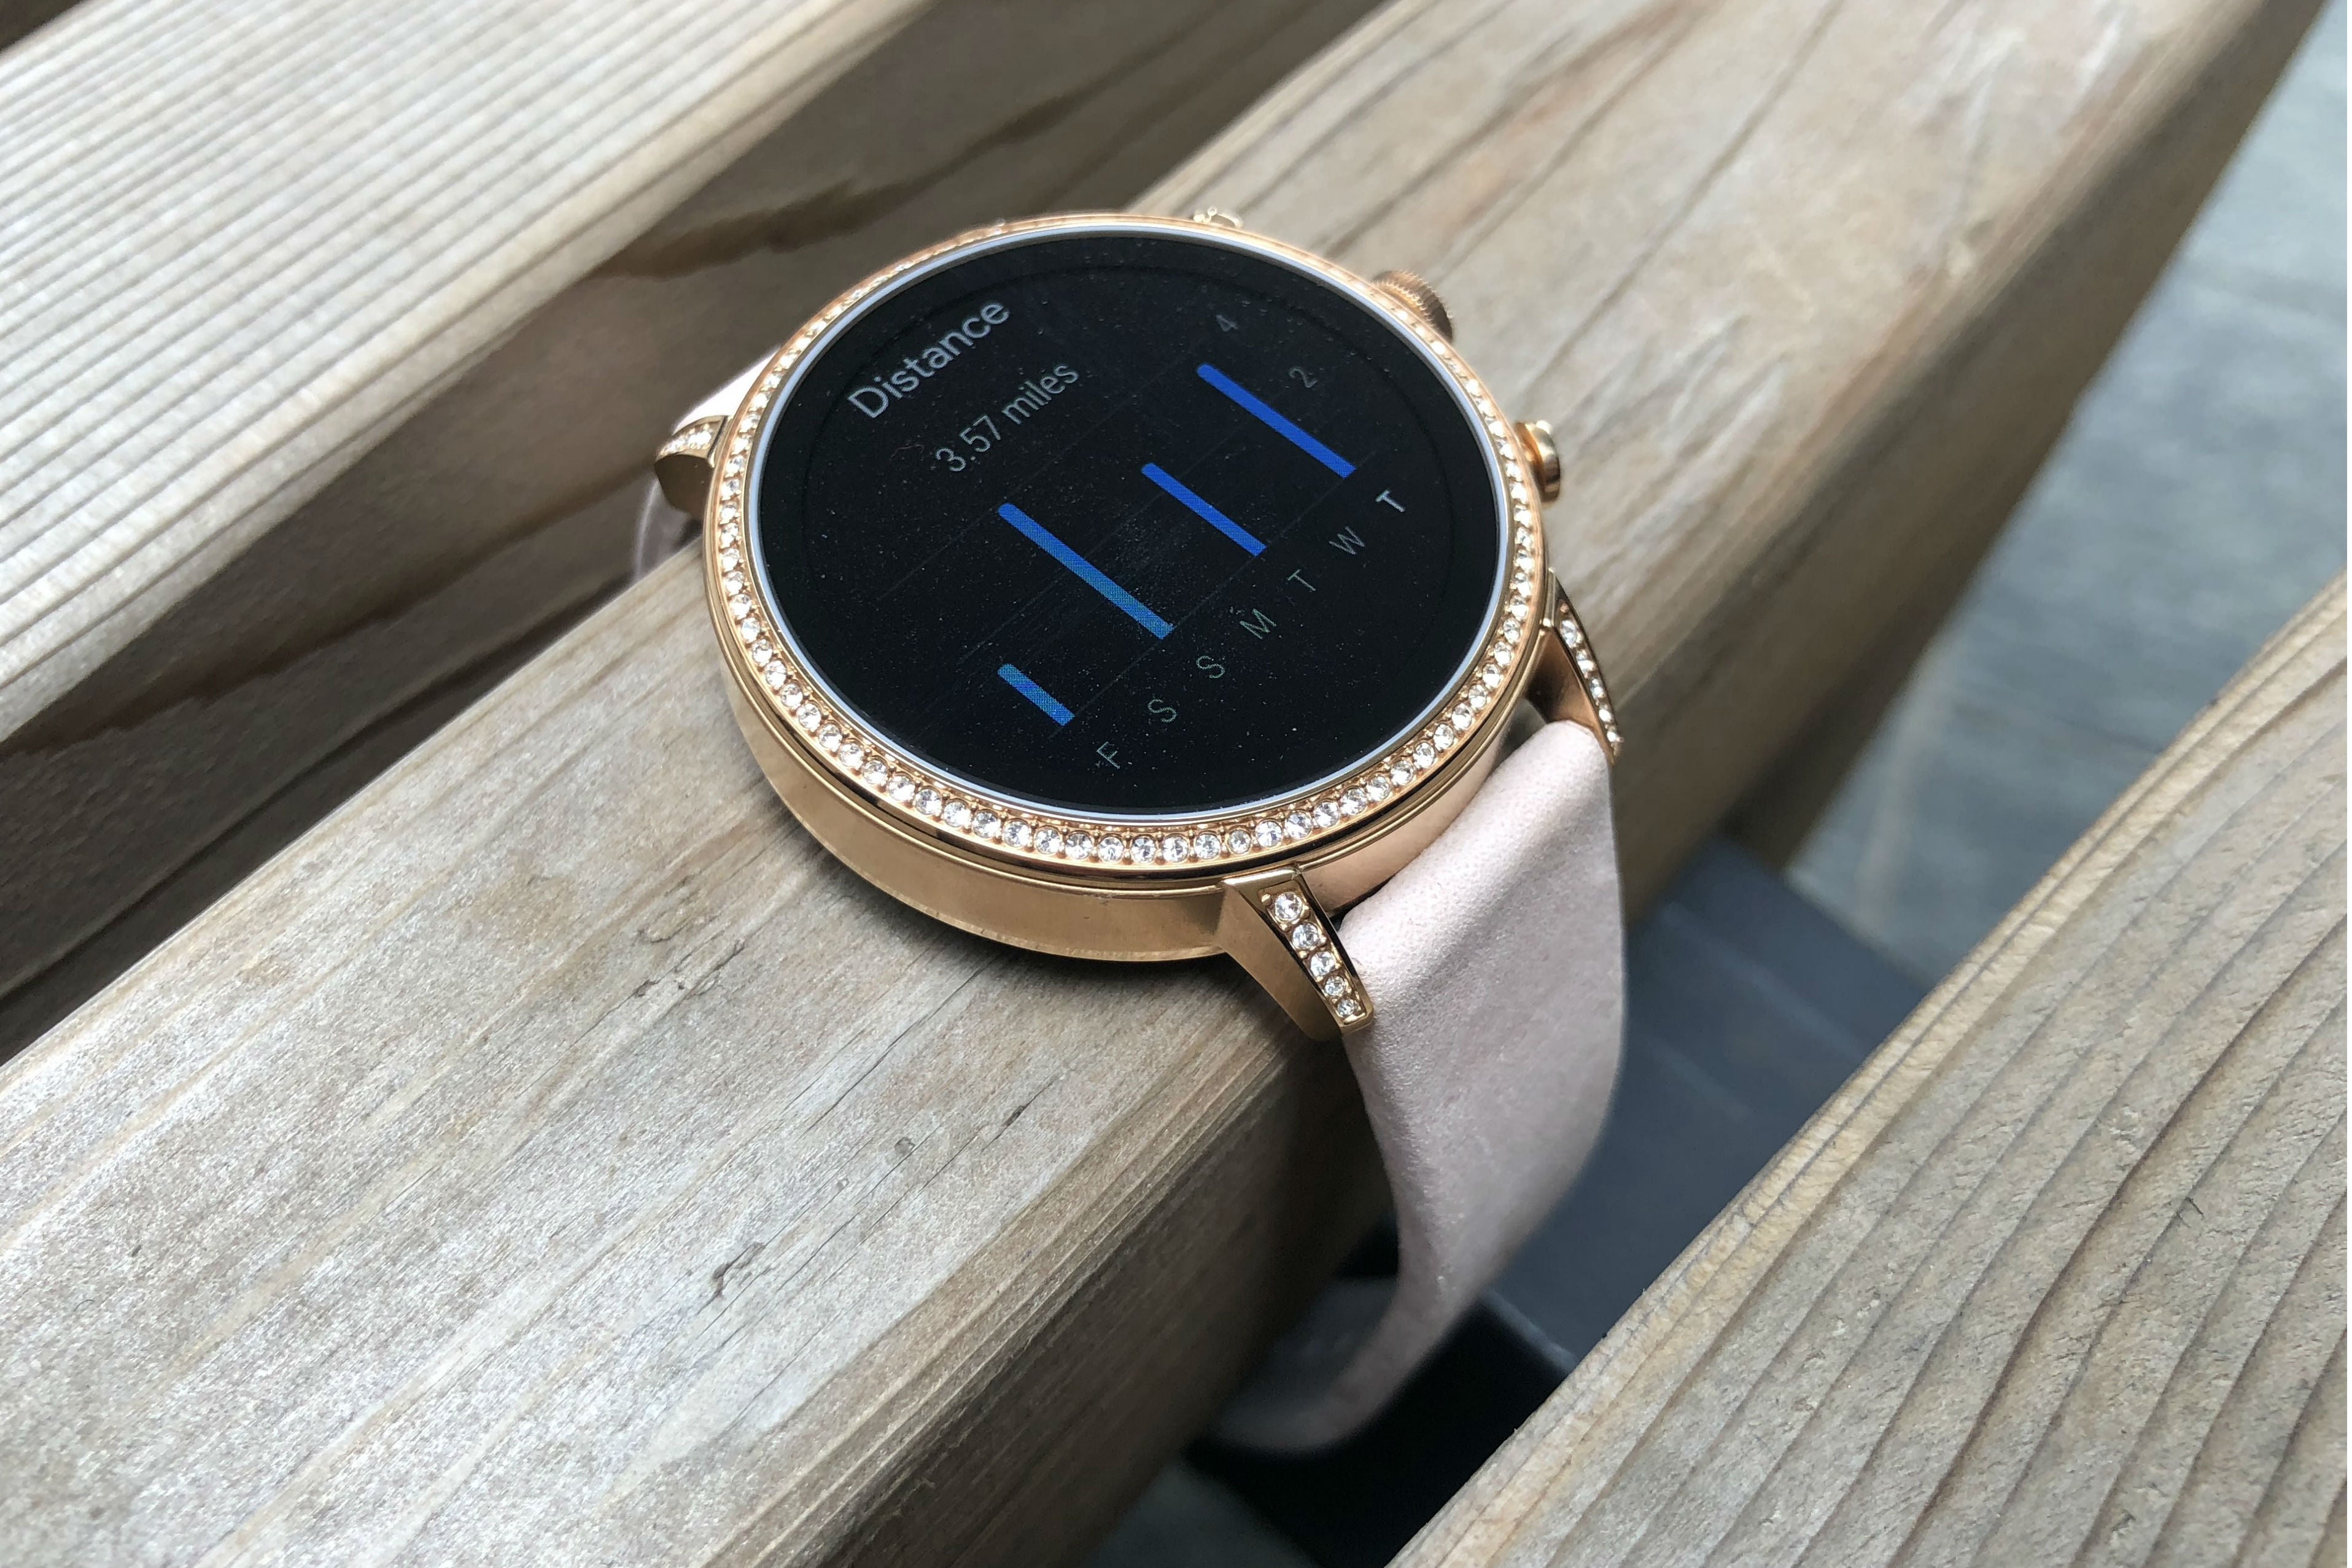 Fossil Q Venture HR review - distance tracking, fitness